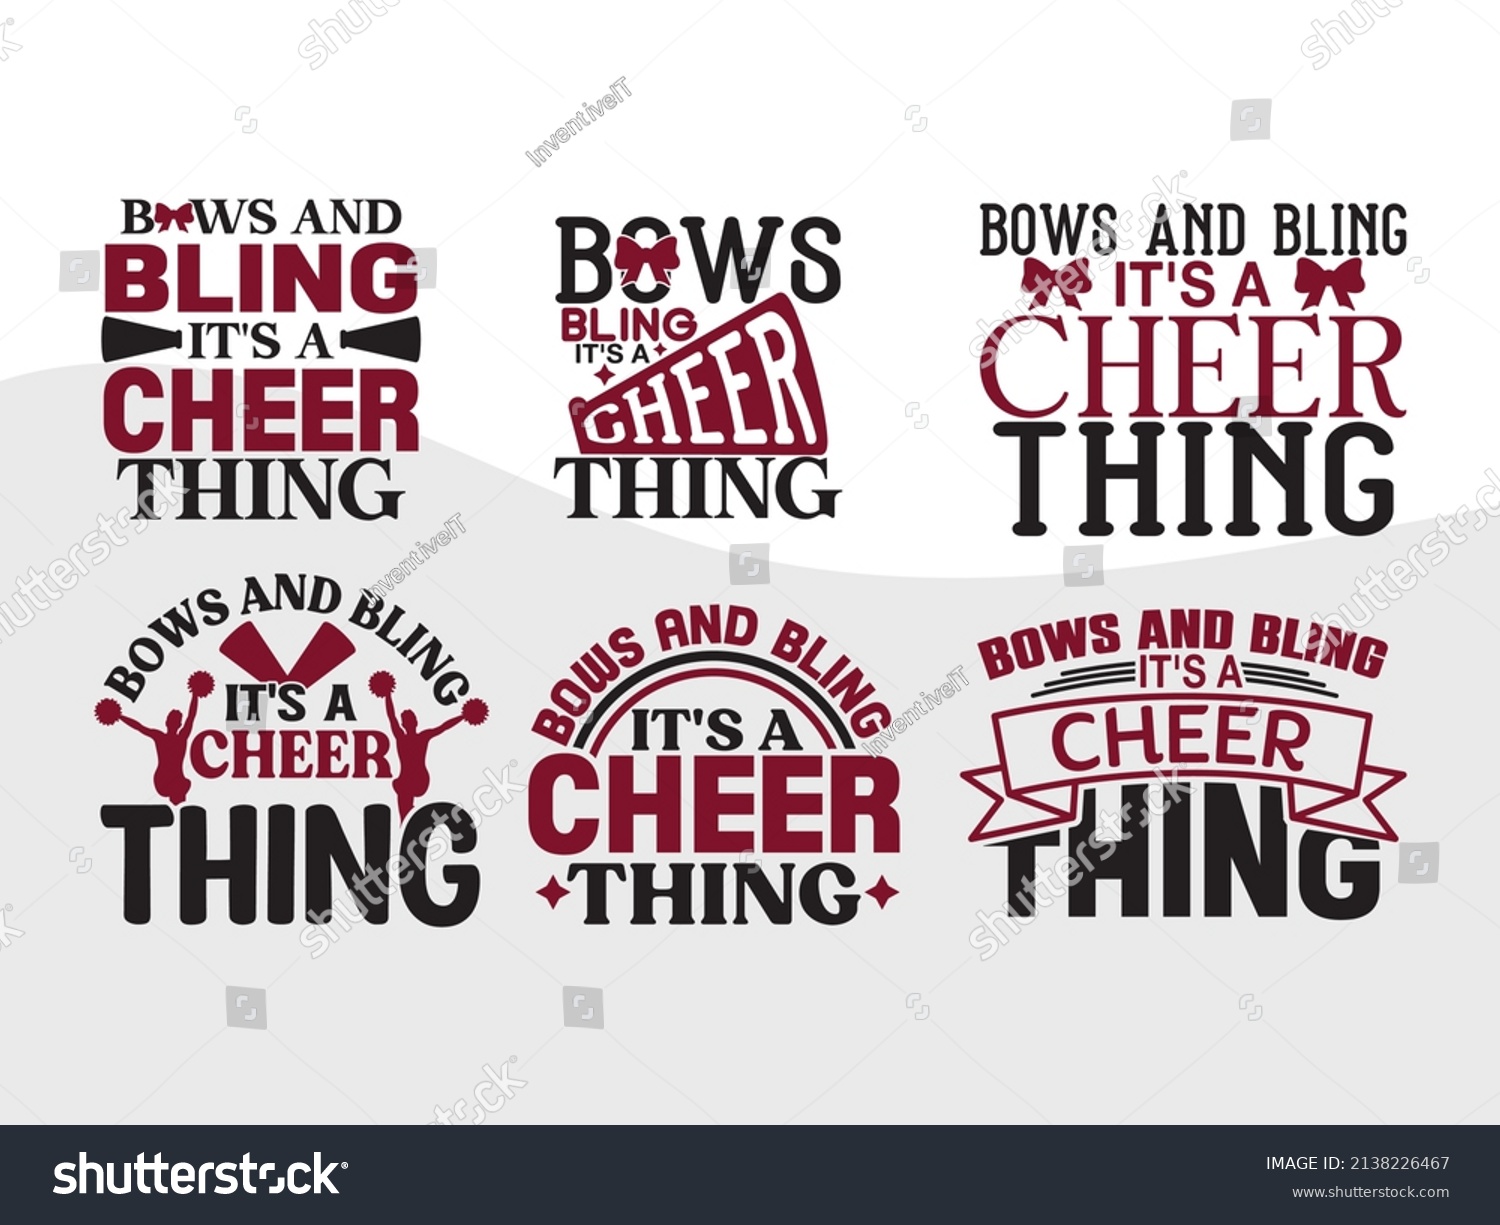 SVG of Bows And Bling Its A Cheer Thing Printable Vector Illustration svg